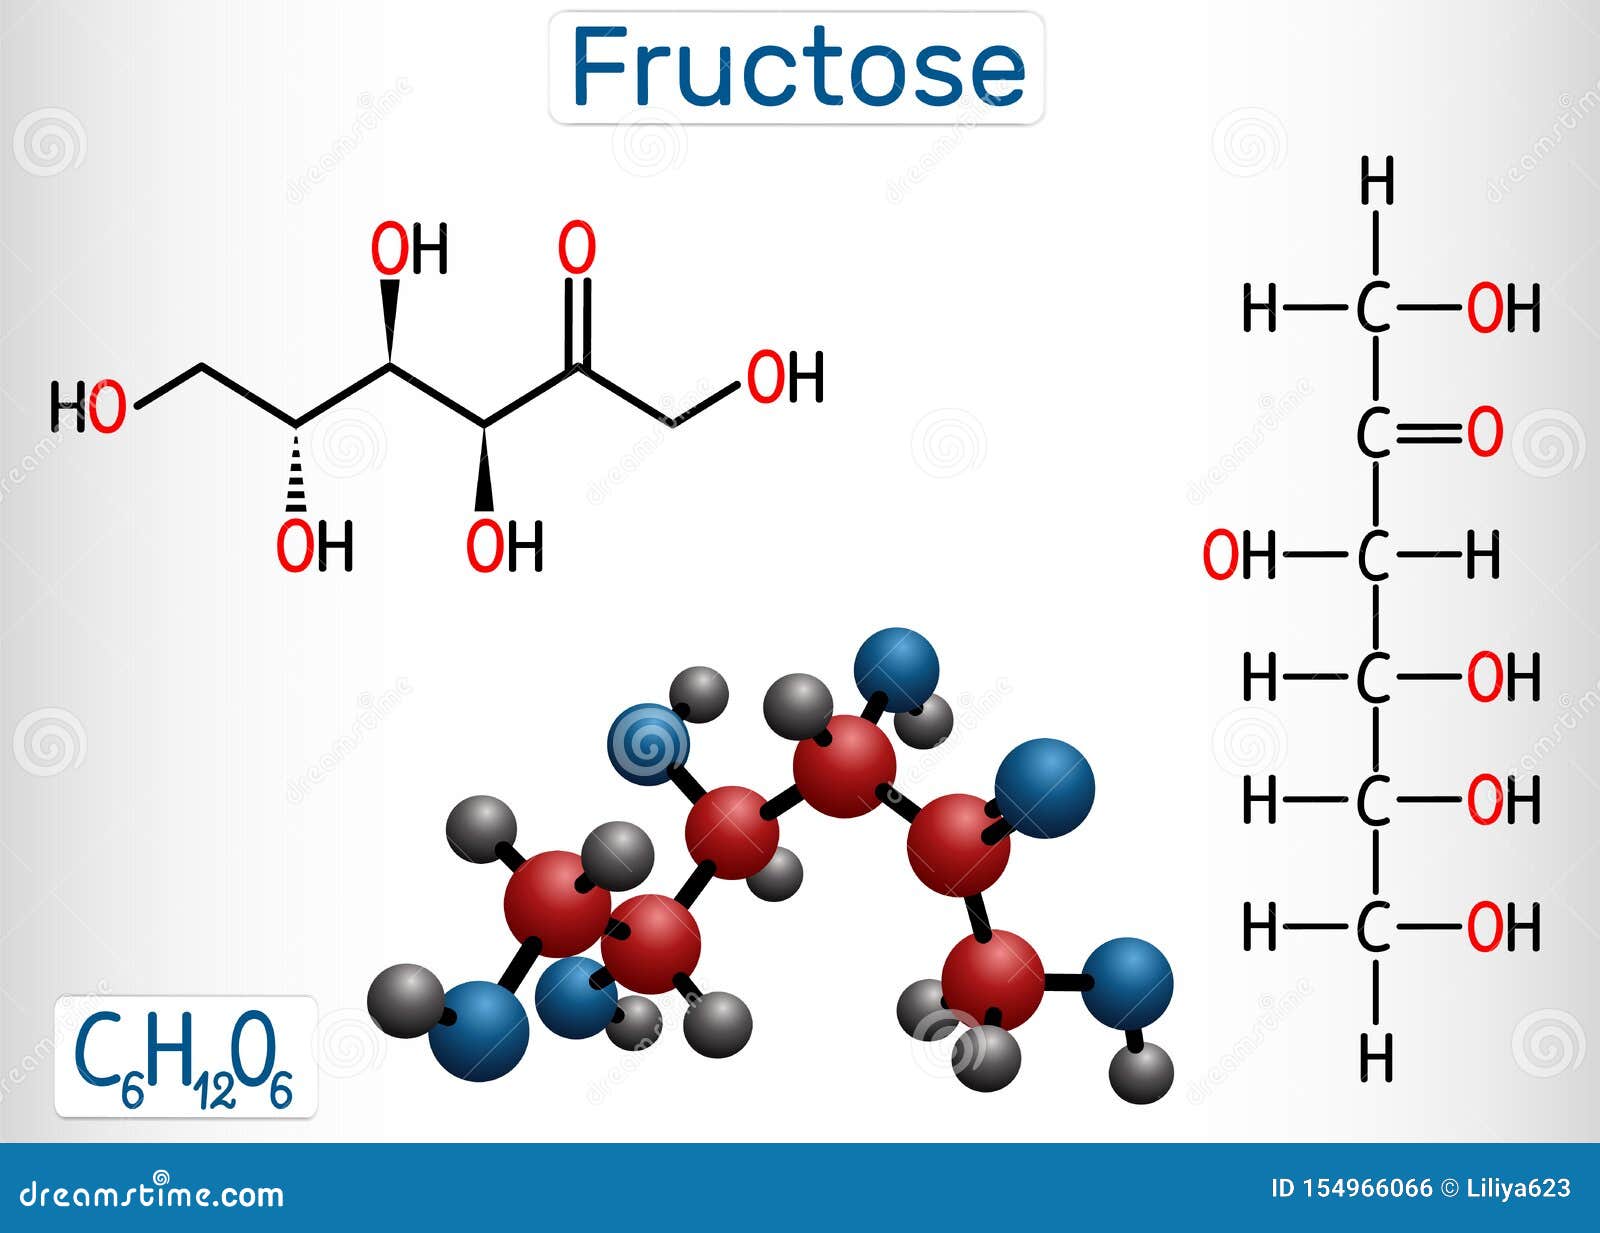 Linear chemical structures of a fructose molecule (left) and a glucose